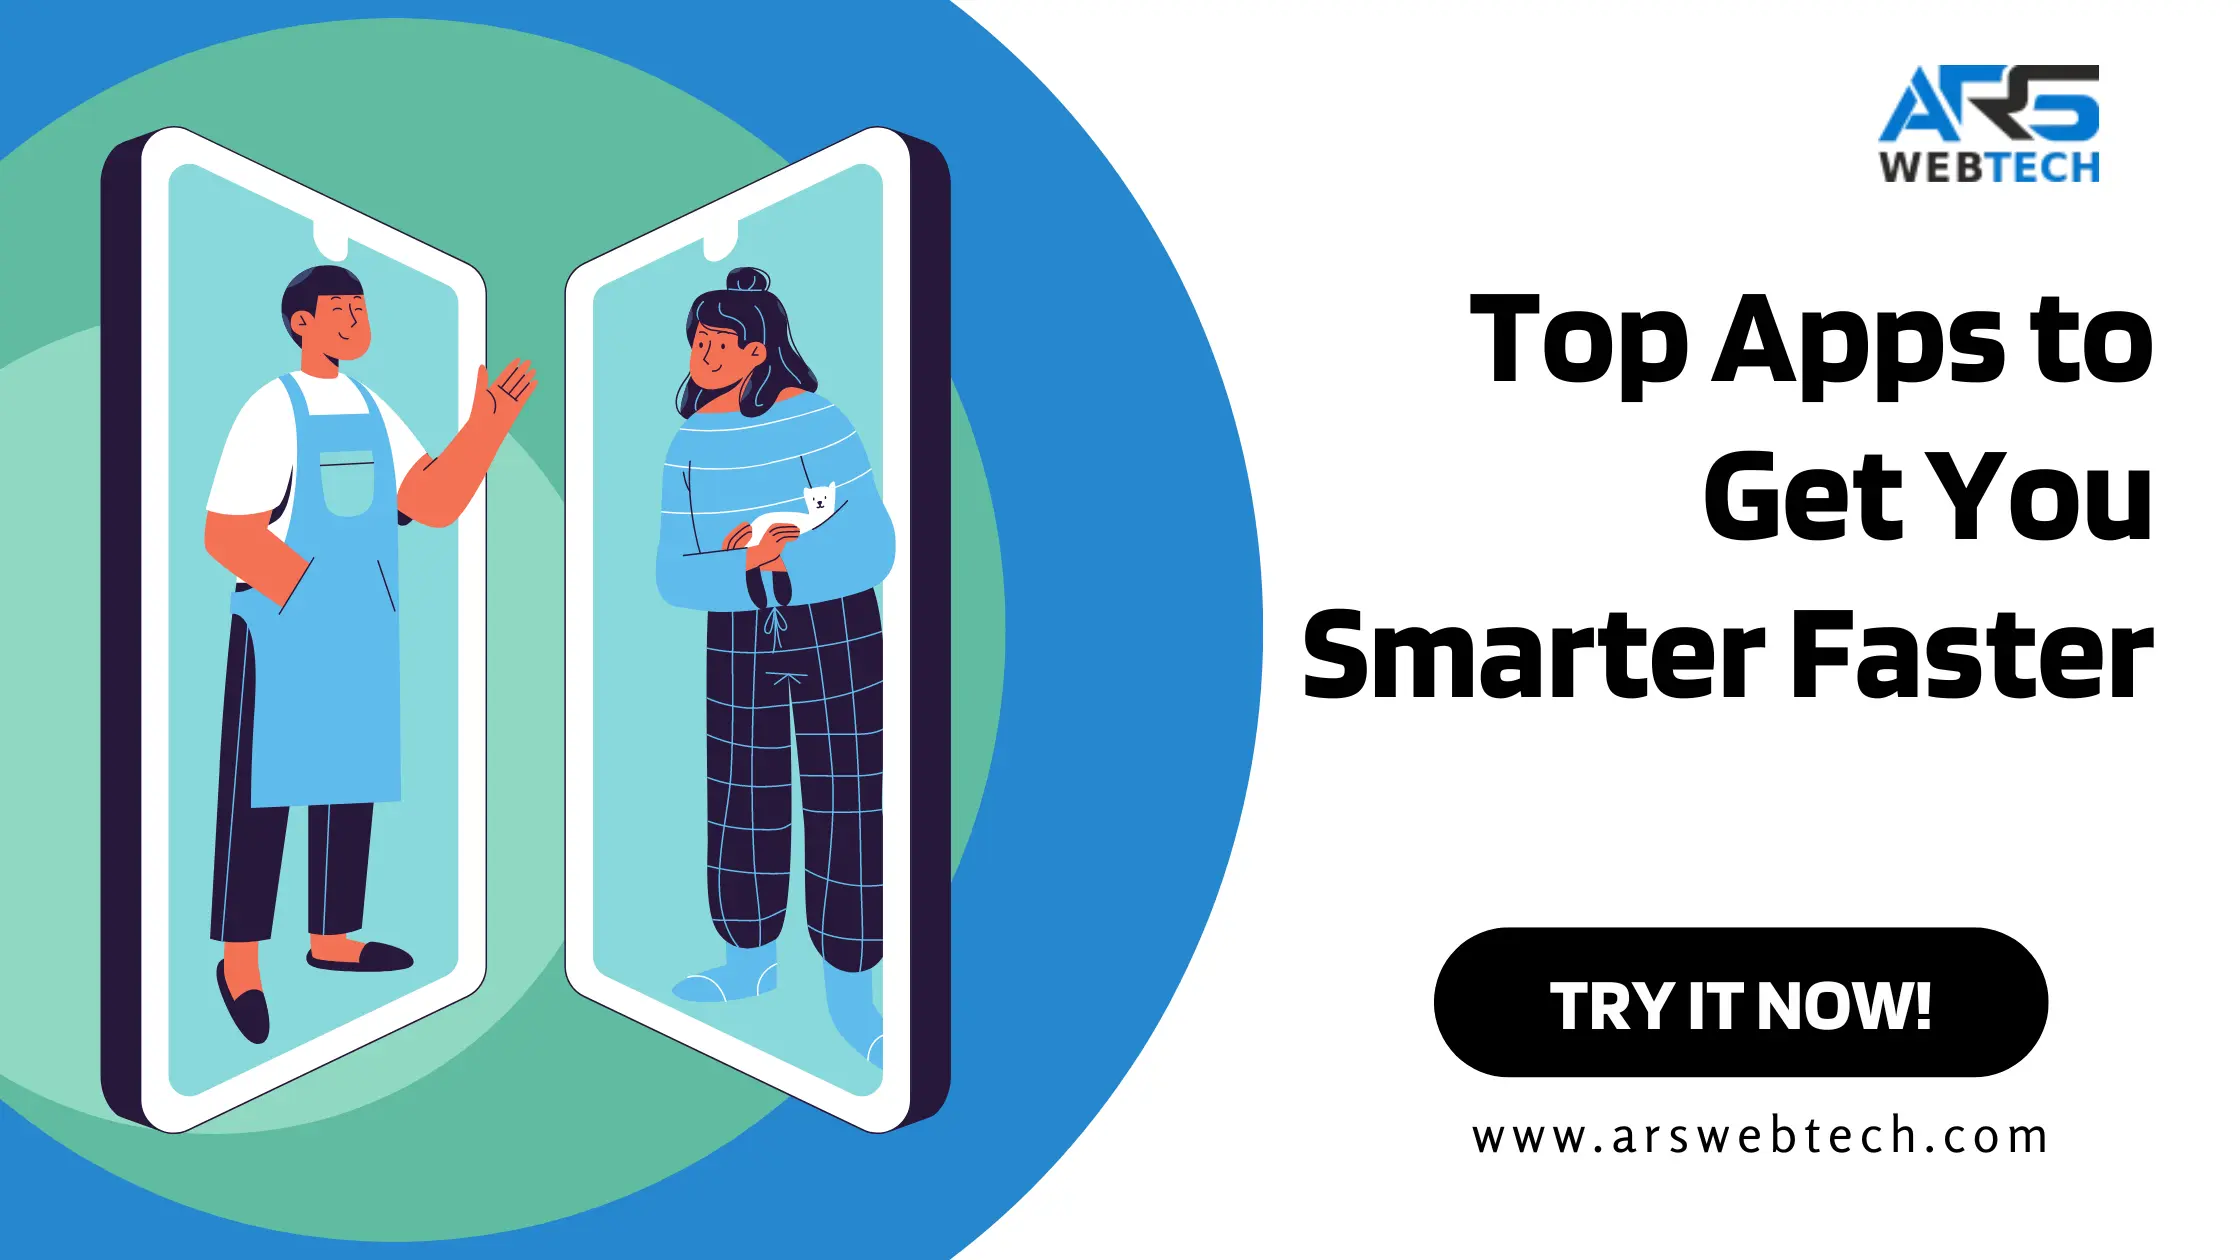 Top Apps to Get You Smarter Faster